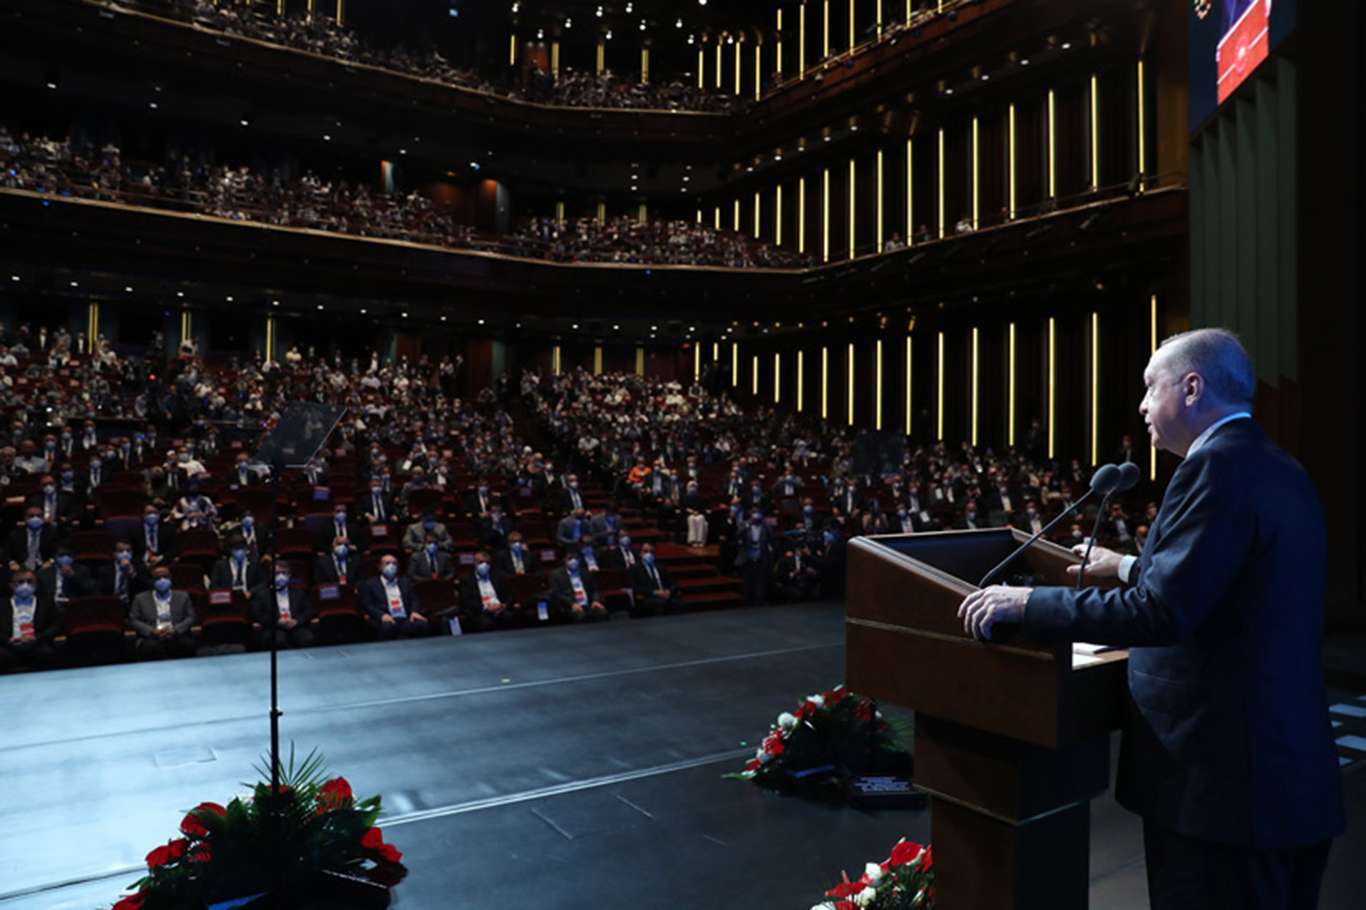 Erdoğan: Societies that value their youth look to their future with confidence